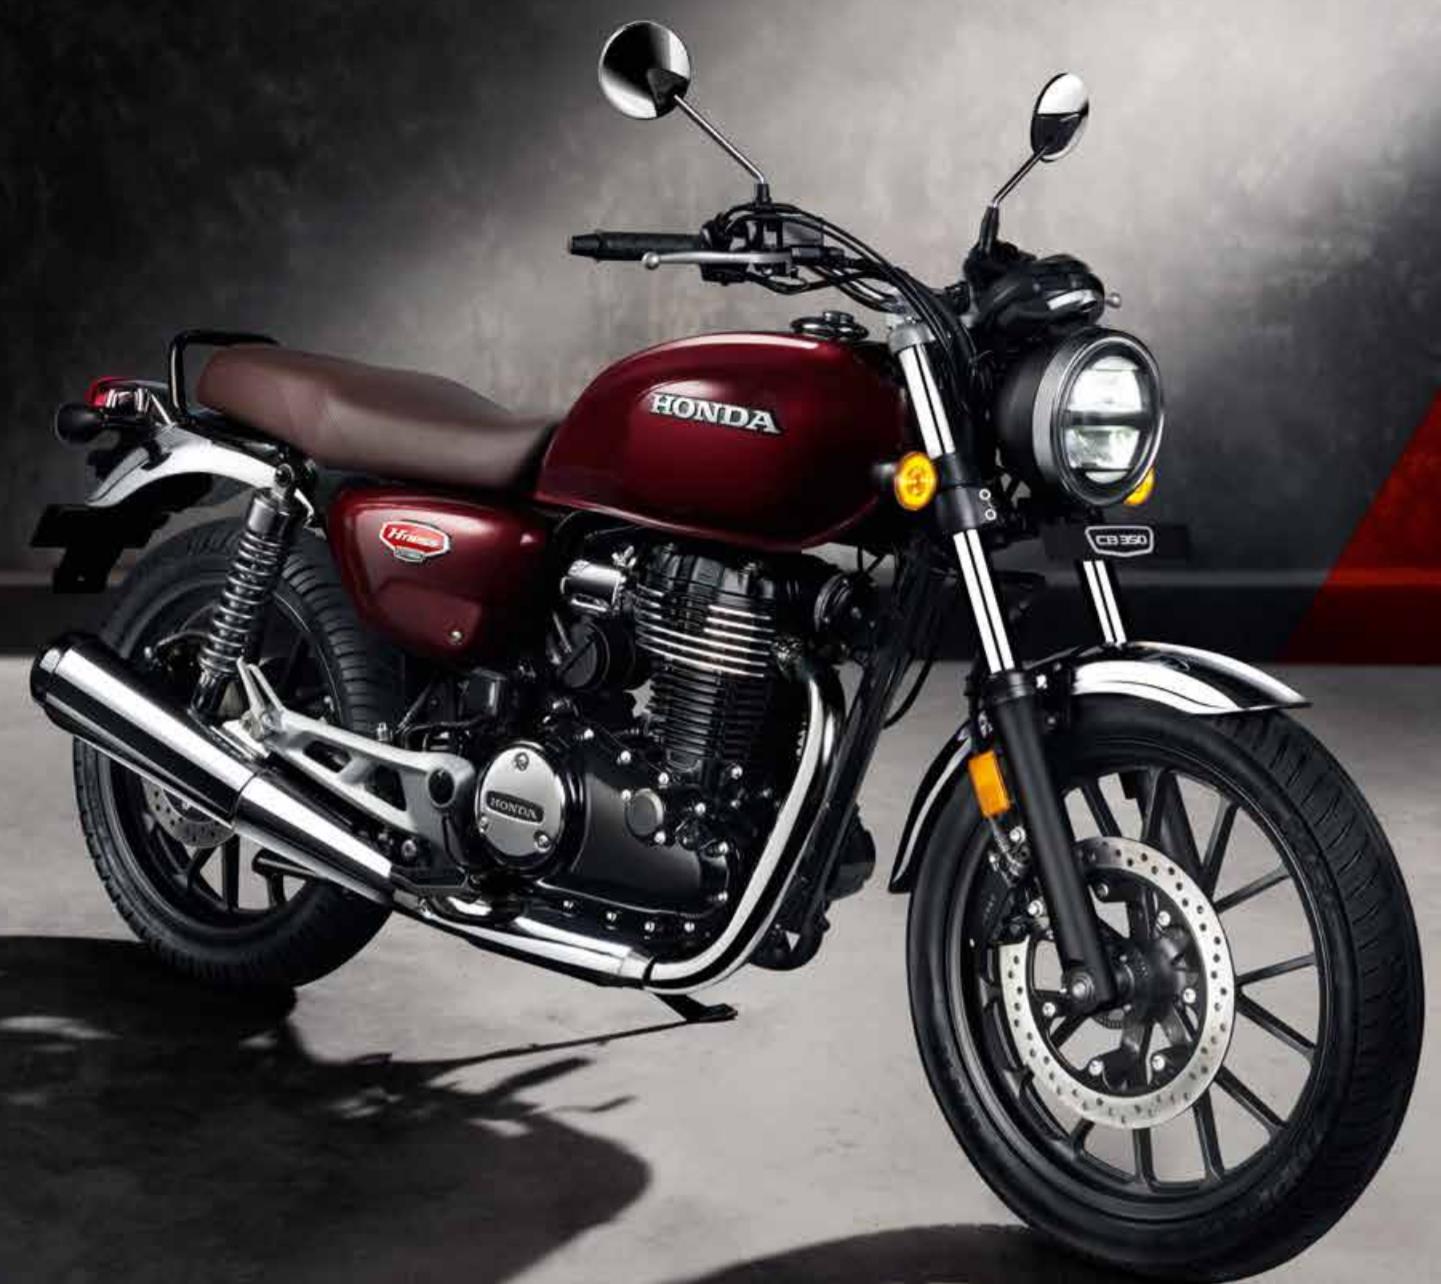 Honda Highness Price, Specs, Review, Pics & Mileage in India